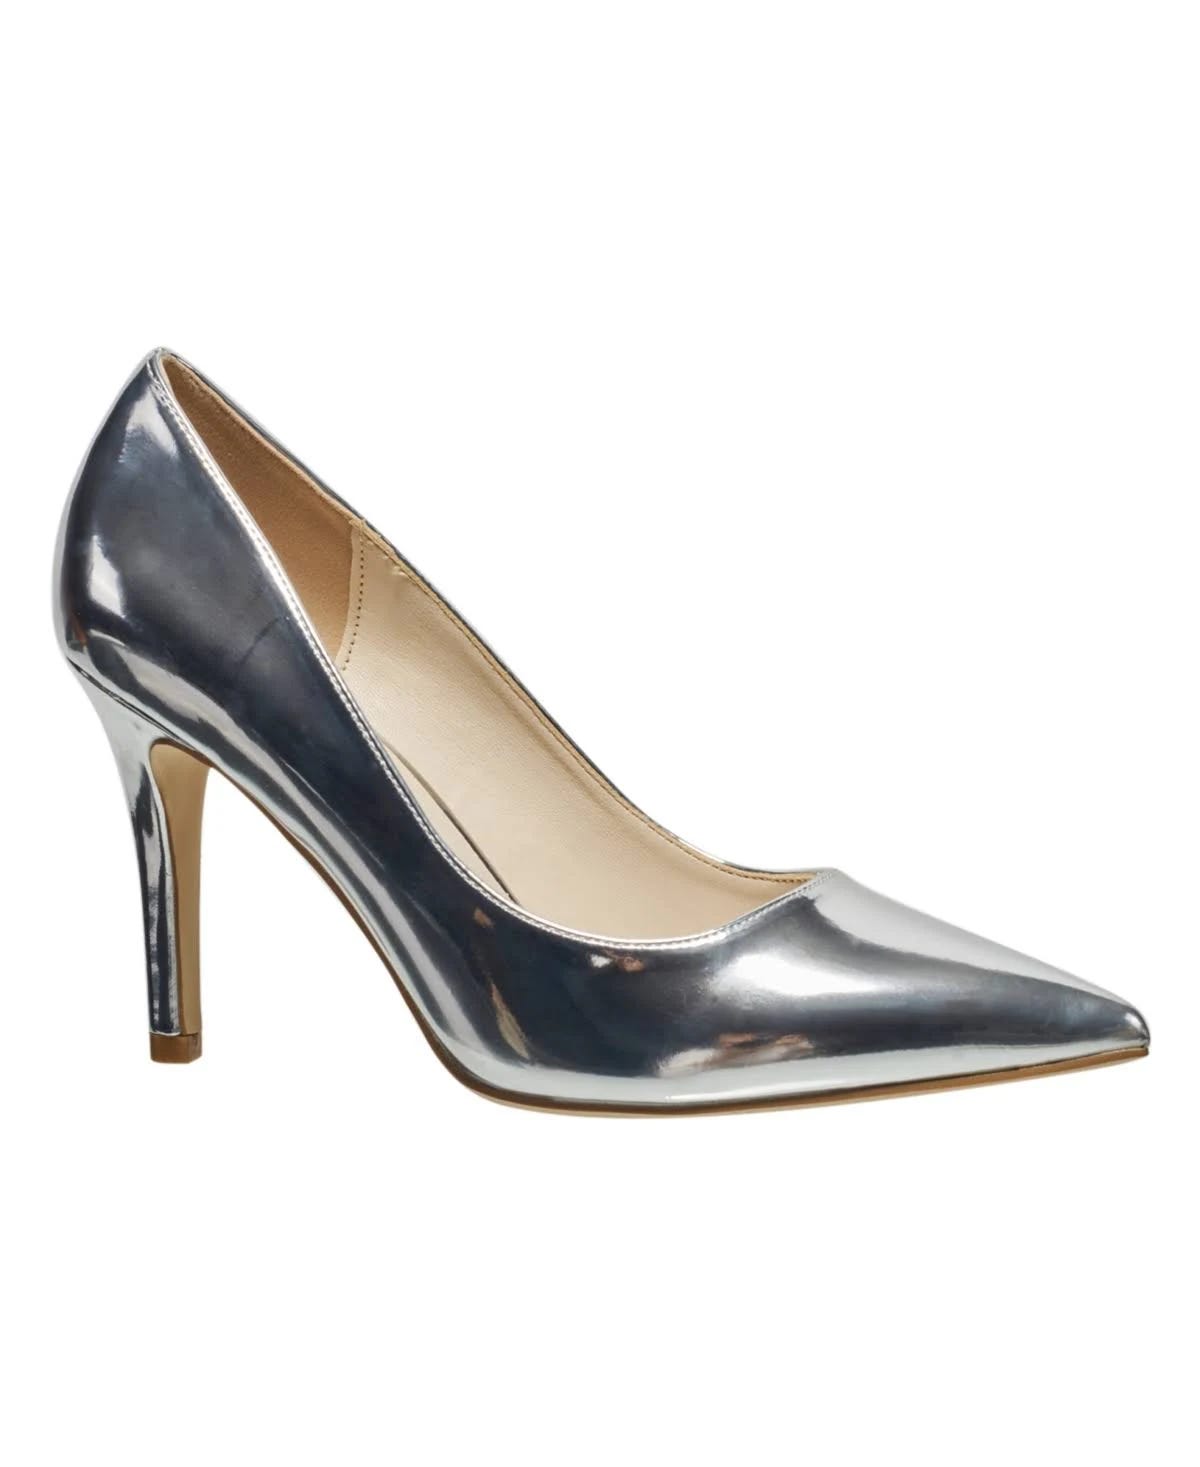 Chic Silver Pointed Toe Pumps for Stylish Wardrobe Upgrades | Image